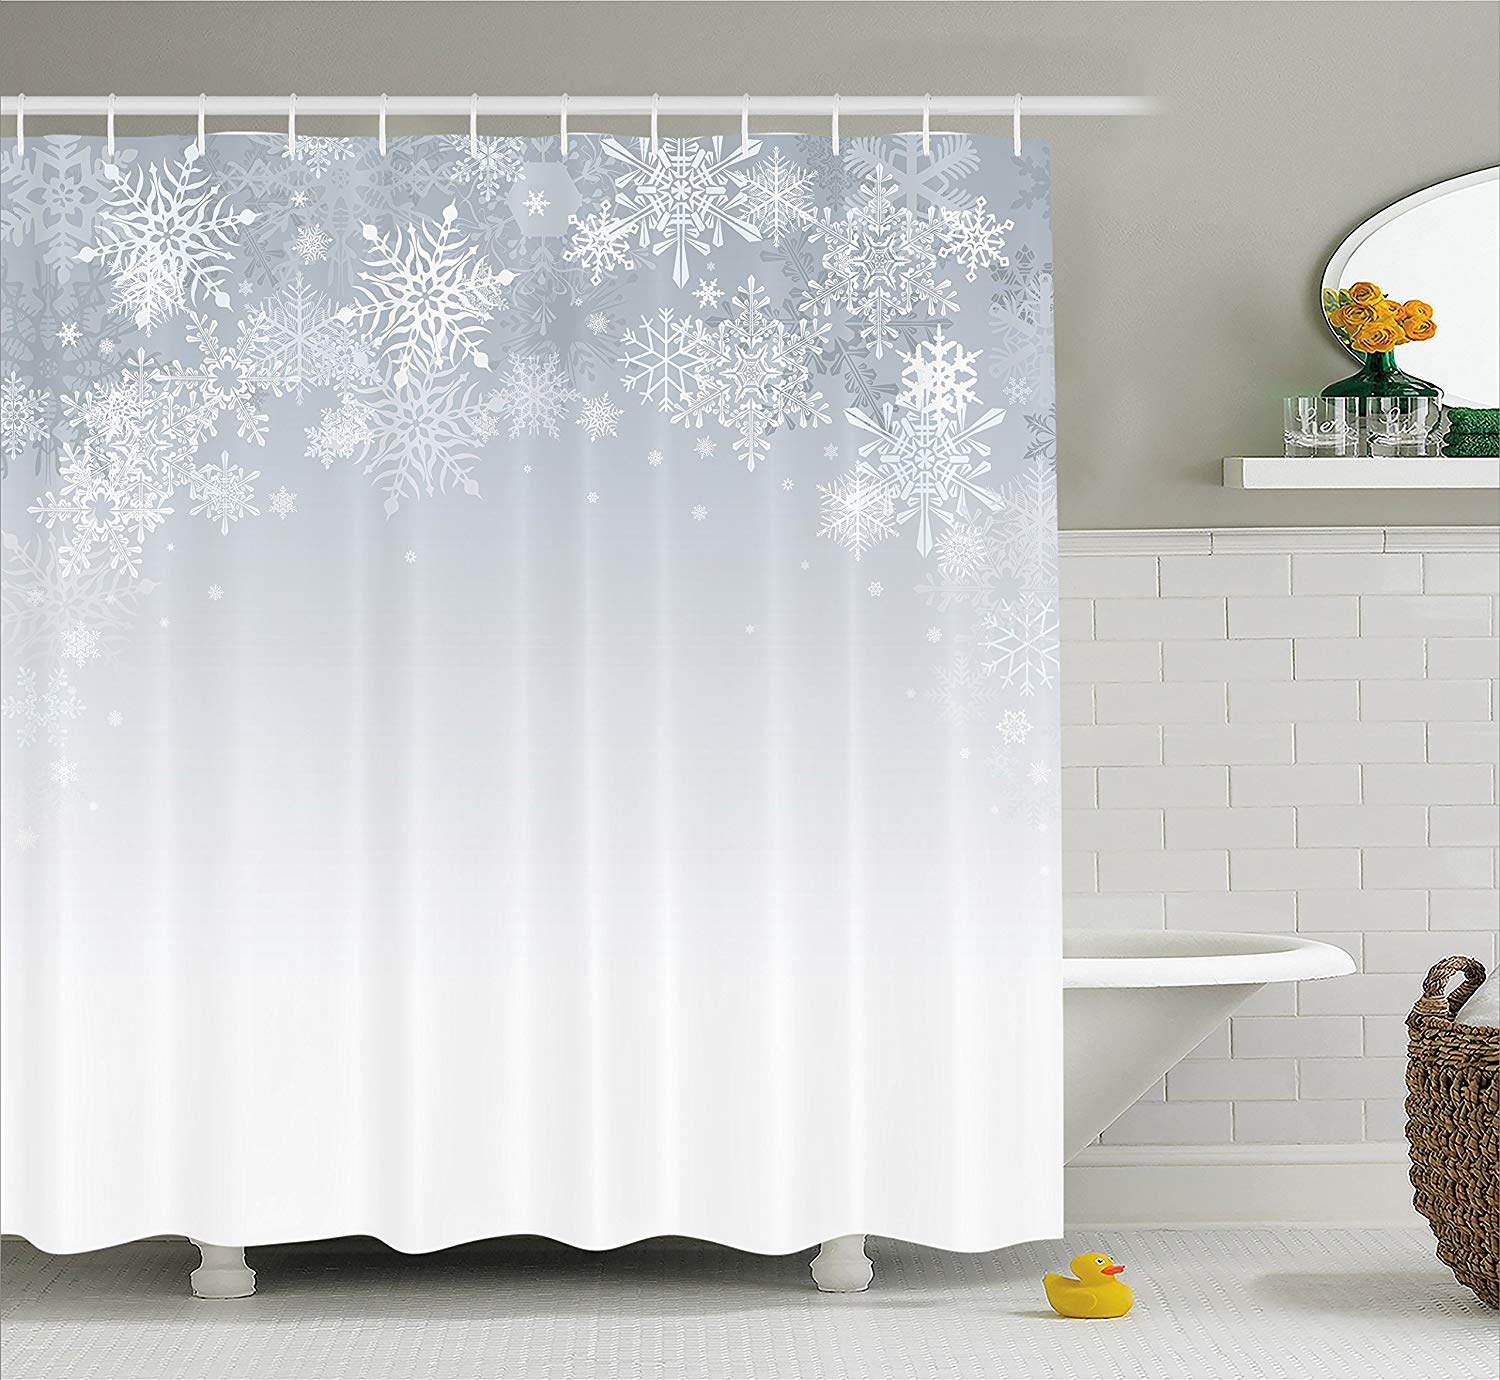 Ambesonne Winter Shower Curtain, Christmas Background with Snowflake Shapes Ornamental Design on Plain Backdrop, Cloth Fabric Bathroom Decor Set with Hooks, 70" Long, Blue Grey